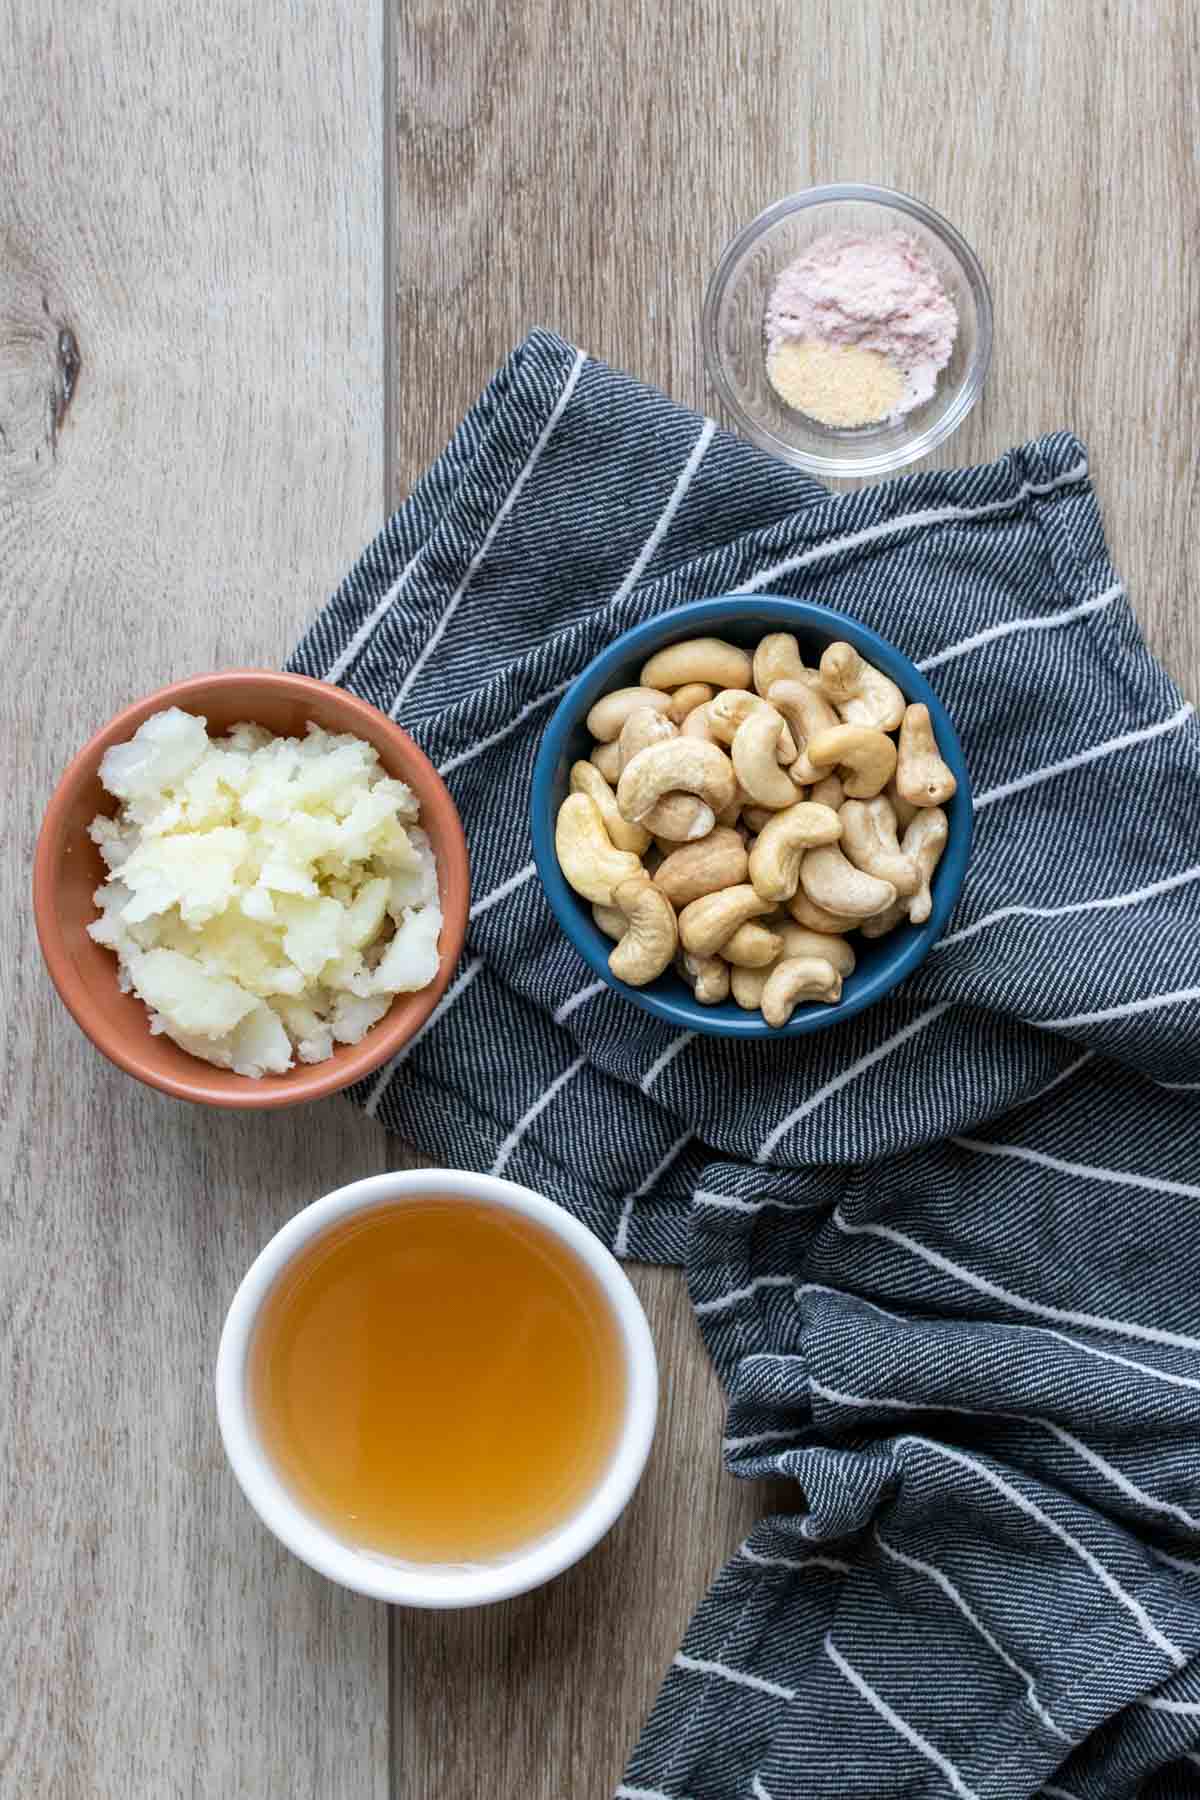 Bowls with cashews, potato, broth and salt on a blue striped towel on a wooden surface